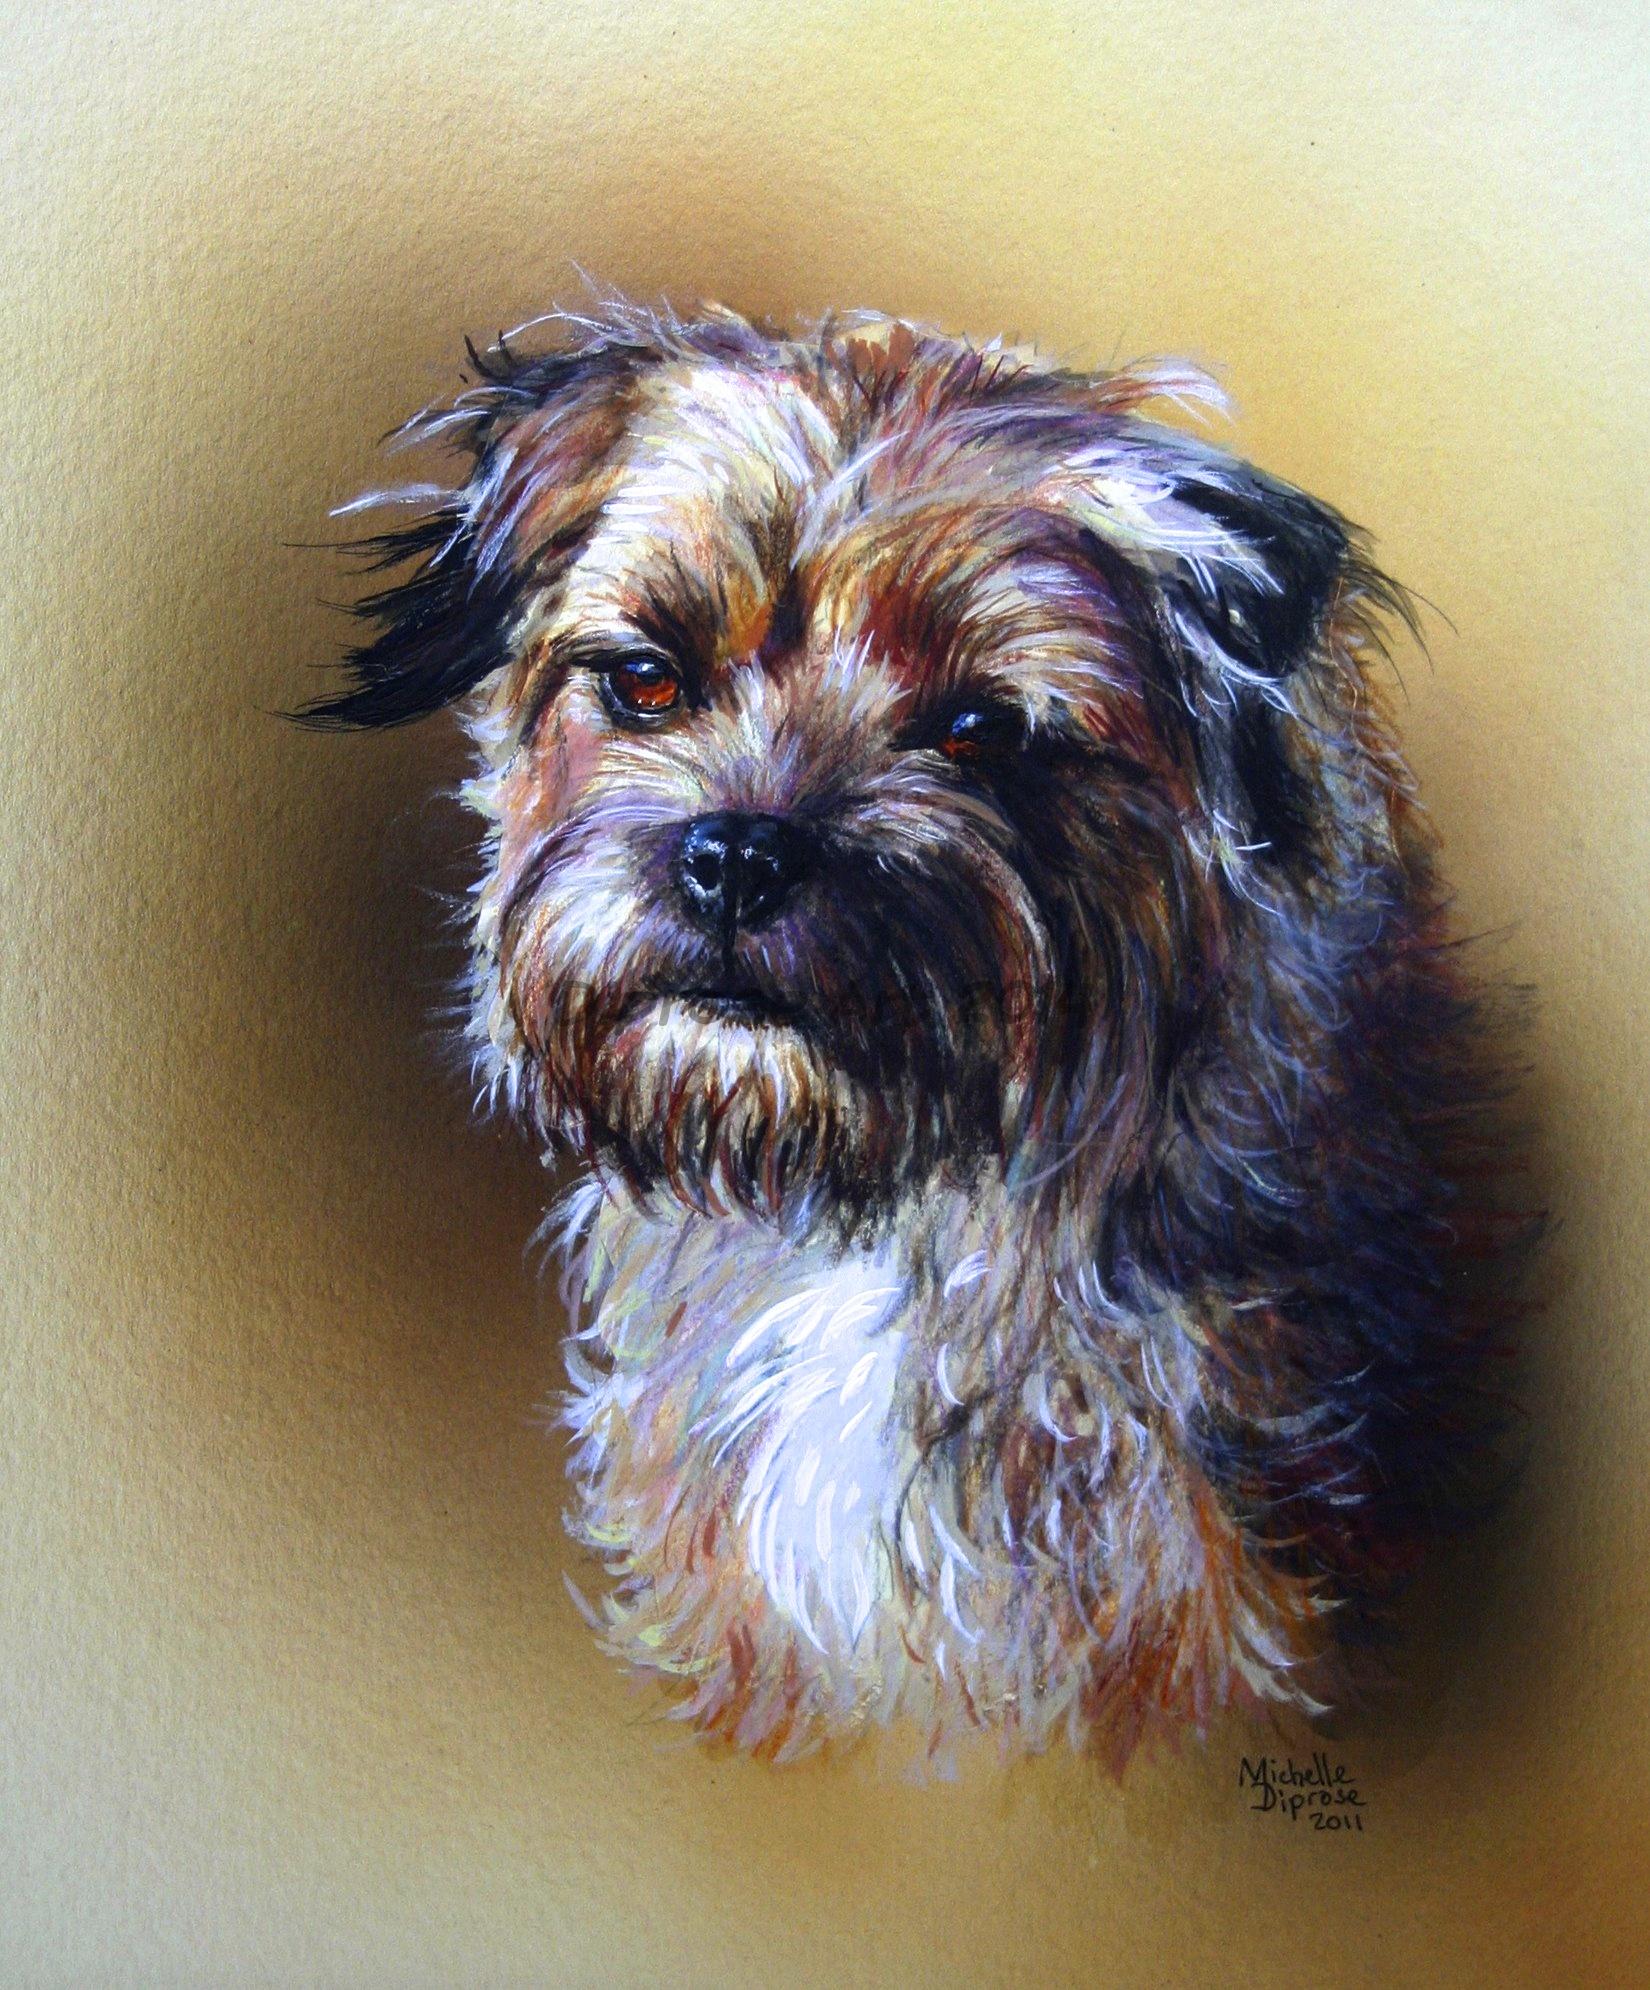 Acrylics on board - approx A4 - pet dog portrait - Pickles is a Border Terrier who belongs to a friend of mine - she lives on a farm and has the most wonderful scruffy thick all weather coat!